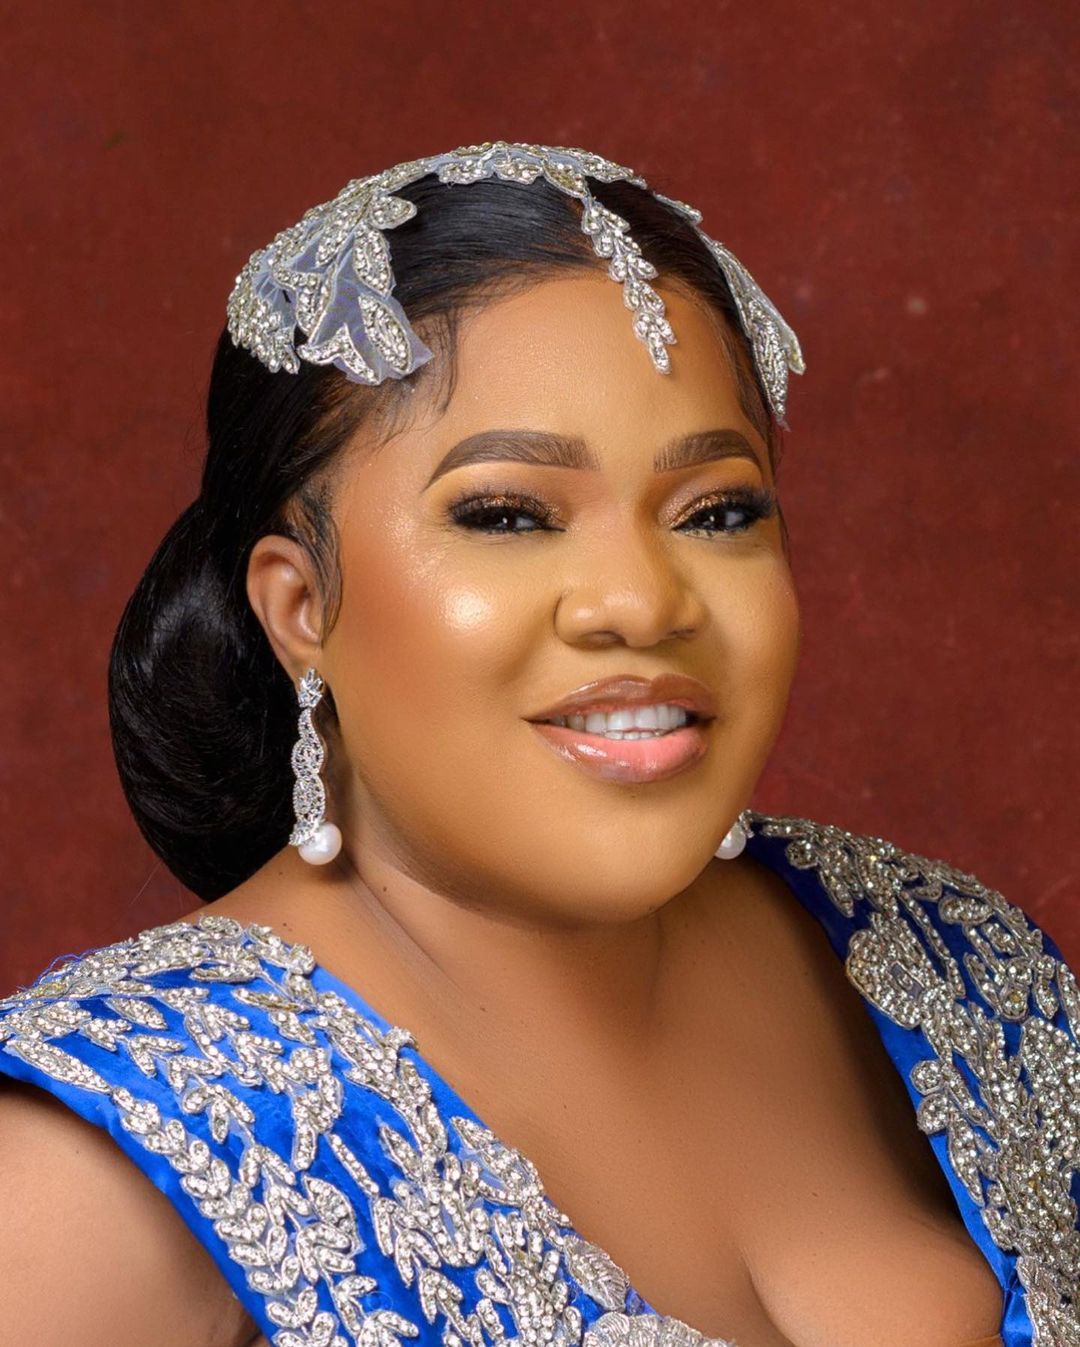 Toyin Abraham says a new era is about to begin on May 29th.